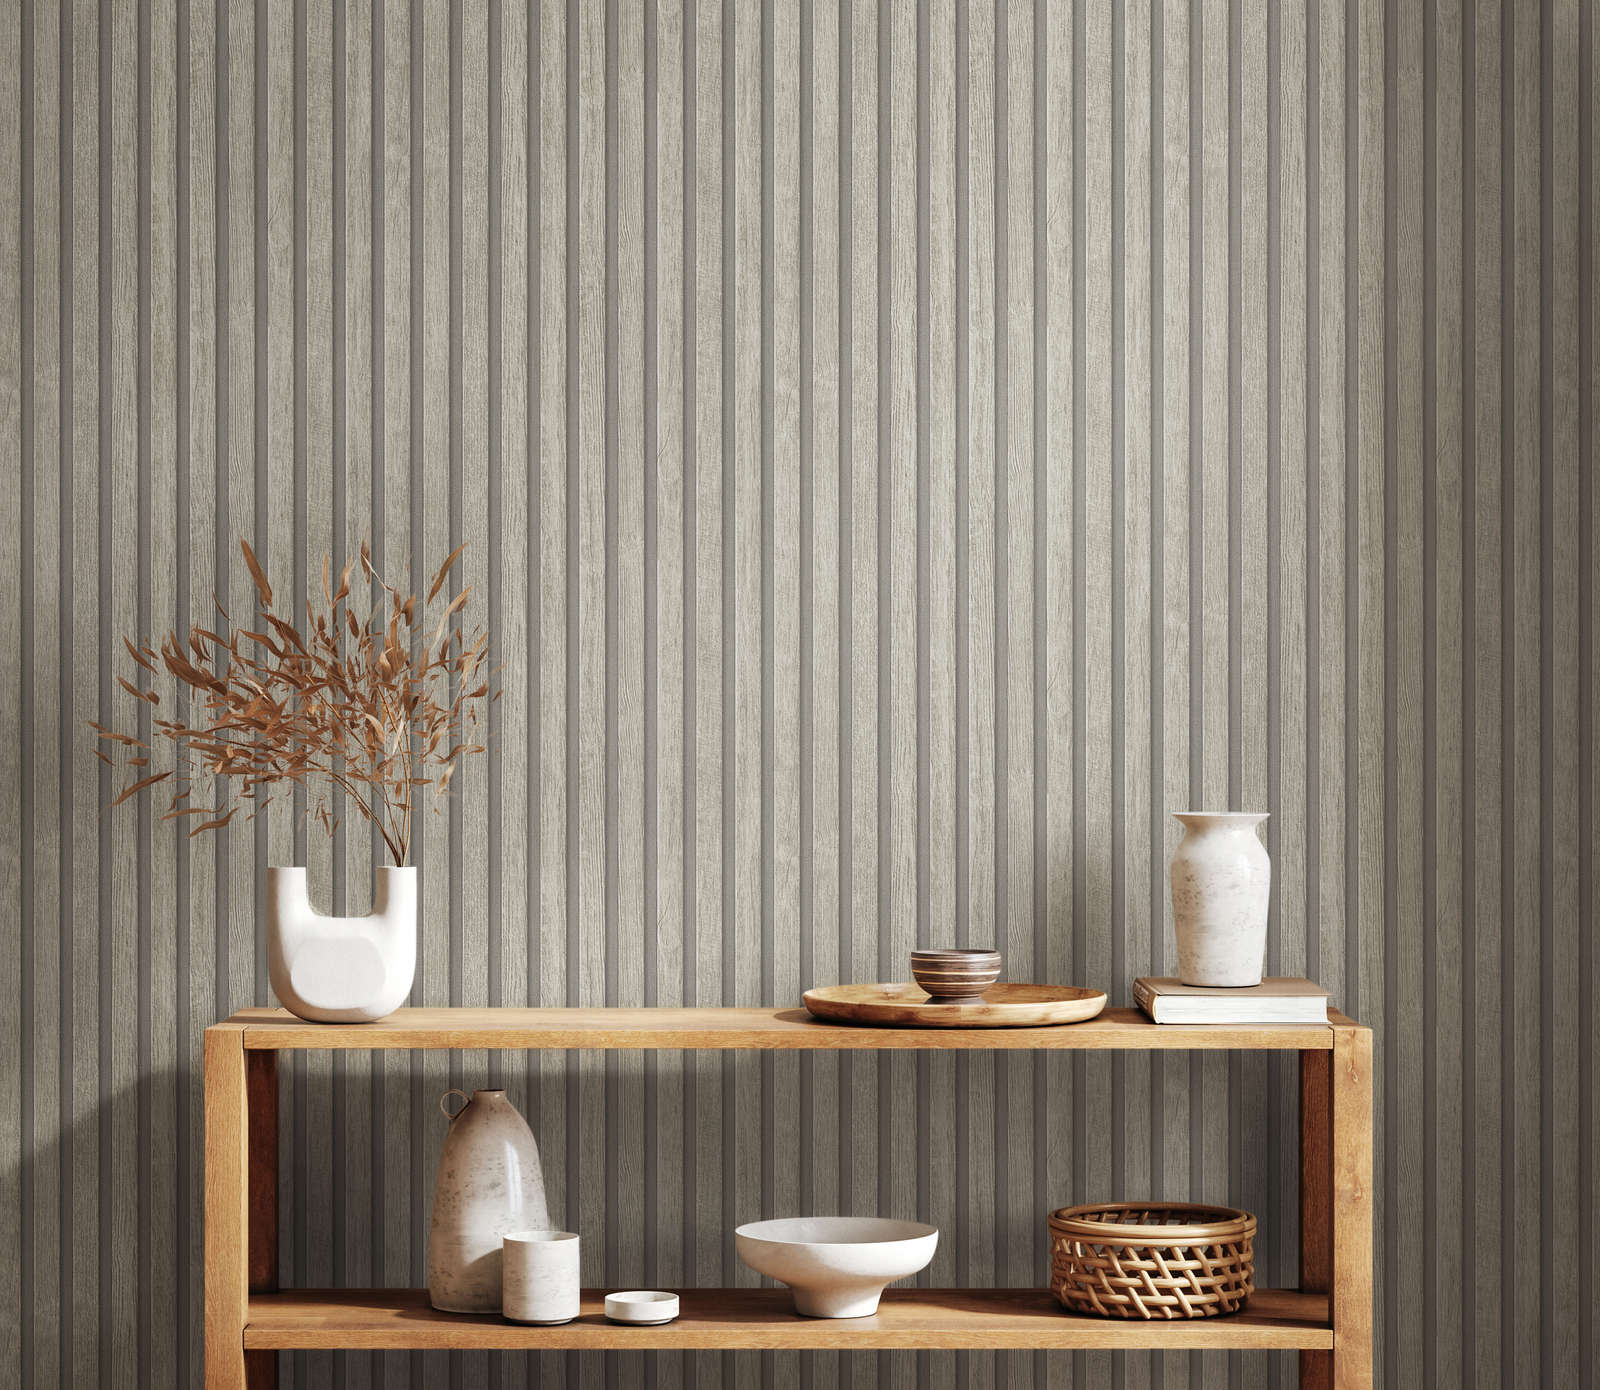             Non-woven wallpaper with wood panel pattern - grey, cream
        